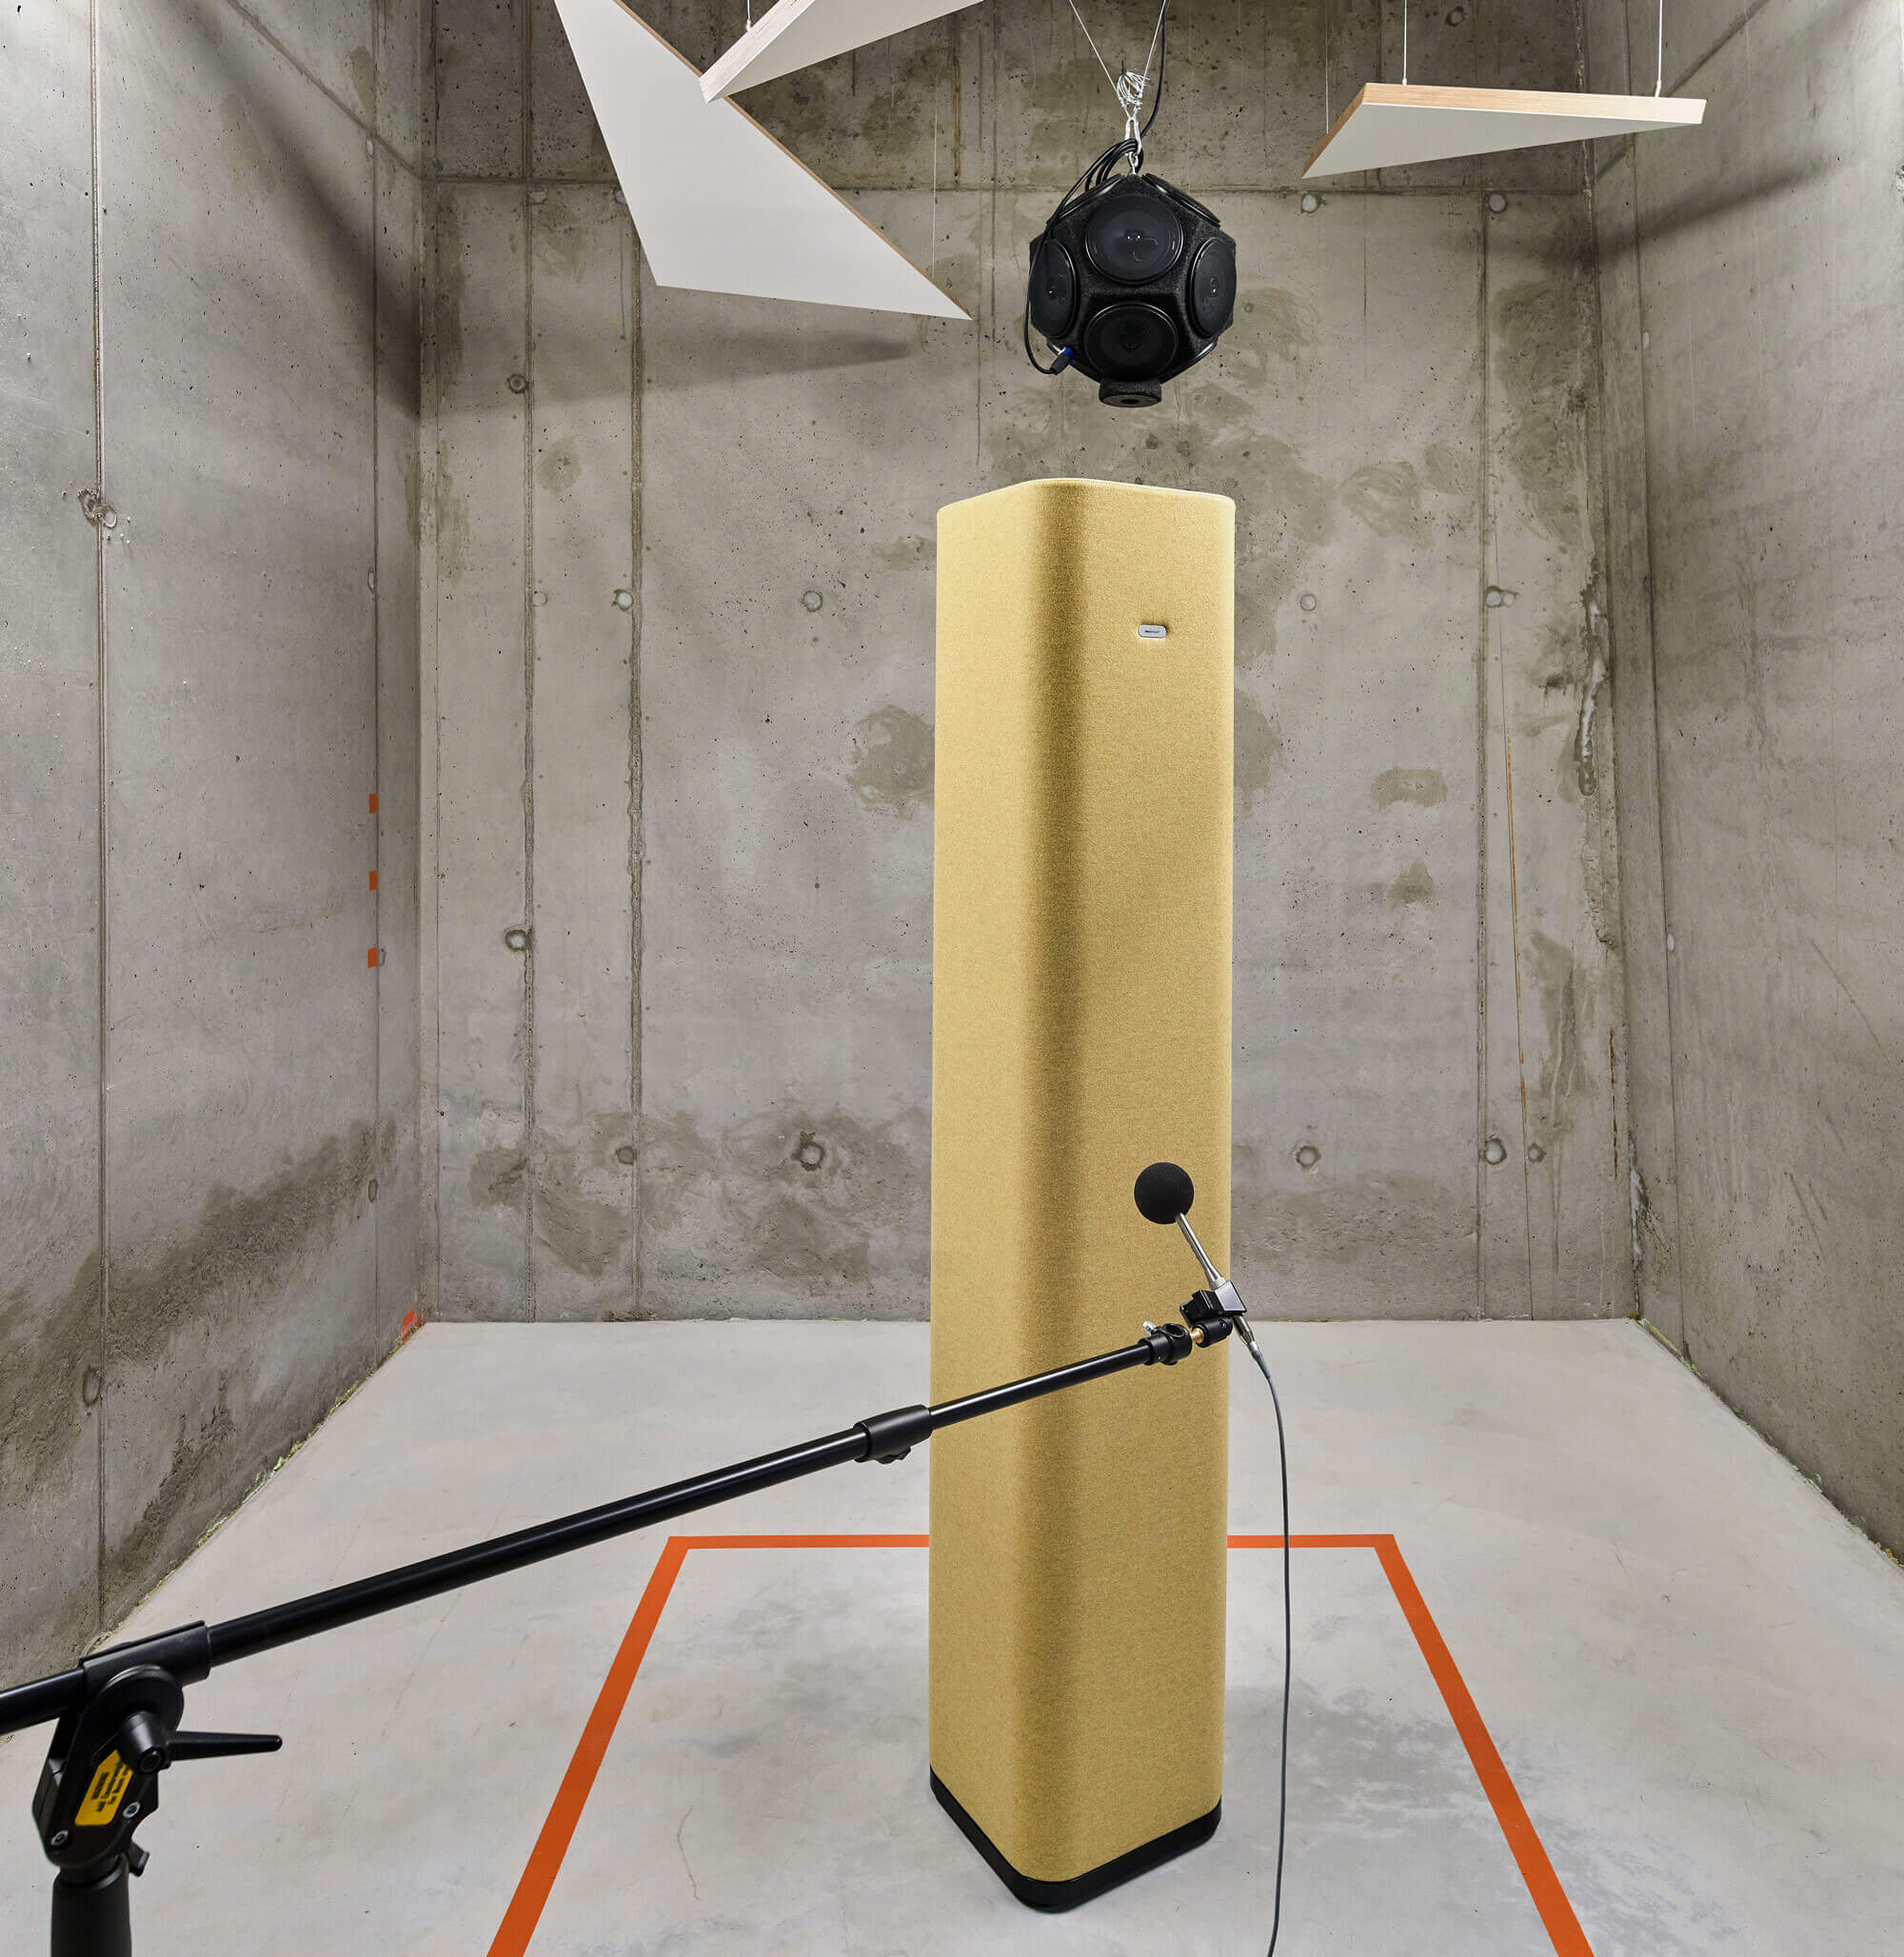 Testing Tower acoustic properties in Mute Sound Lab